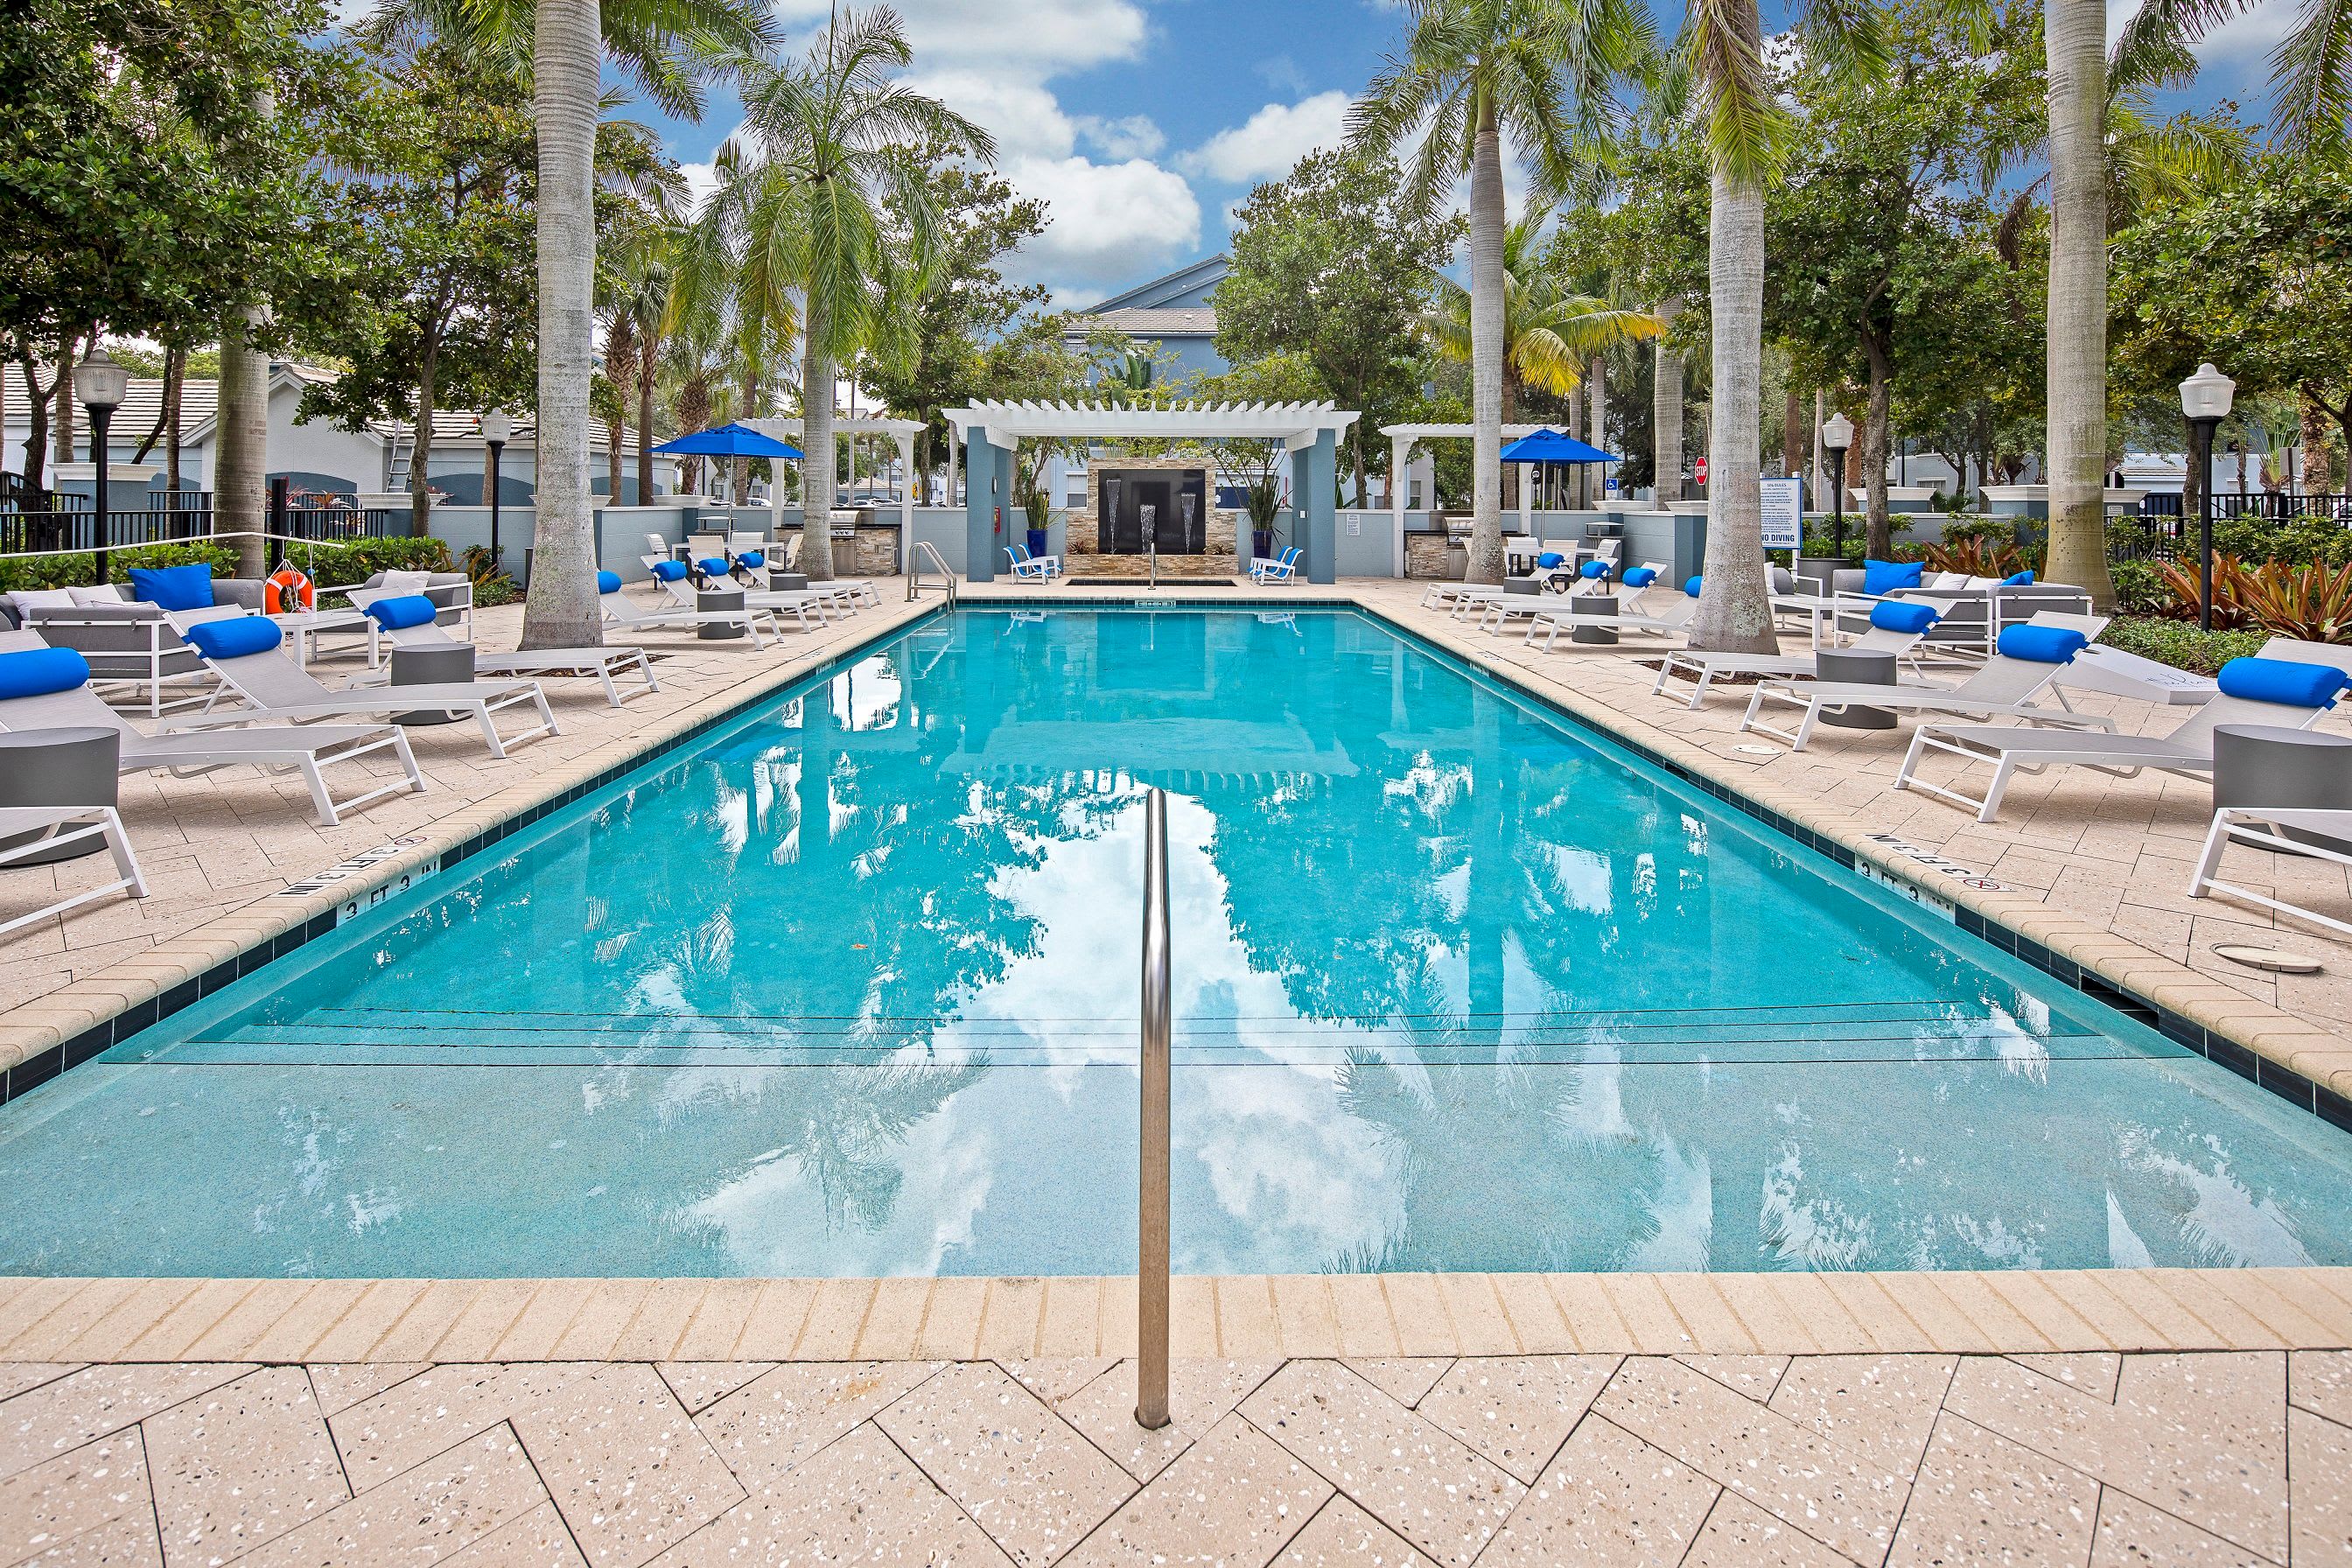 Floor plans at The Pearl in Ft Lauderdale, Florida